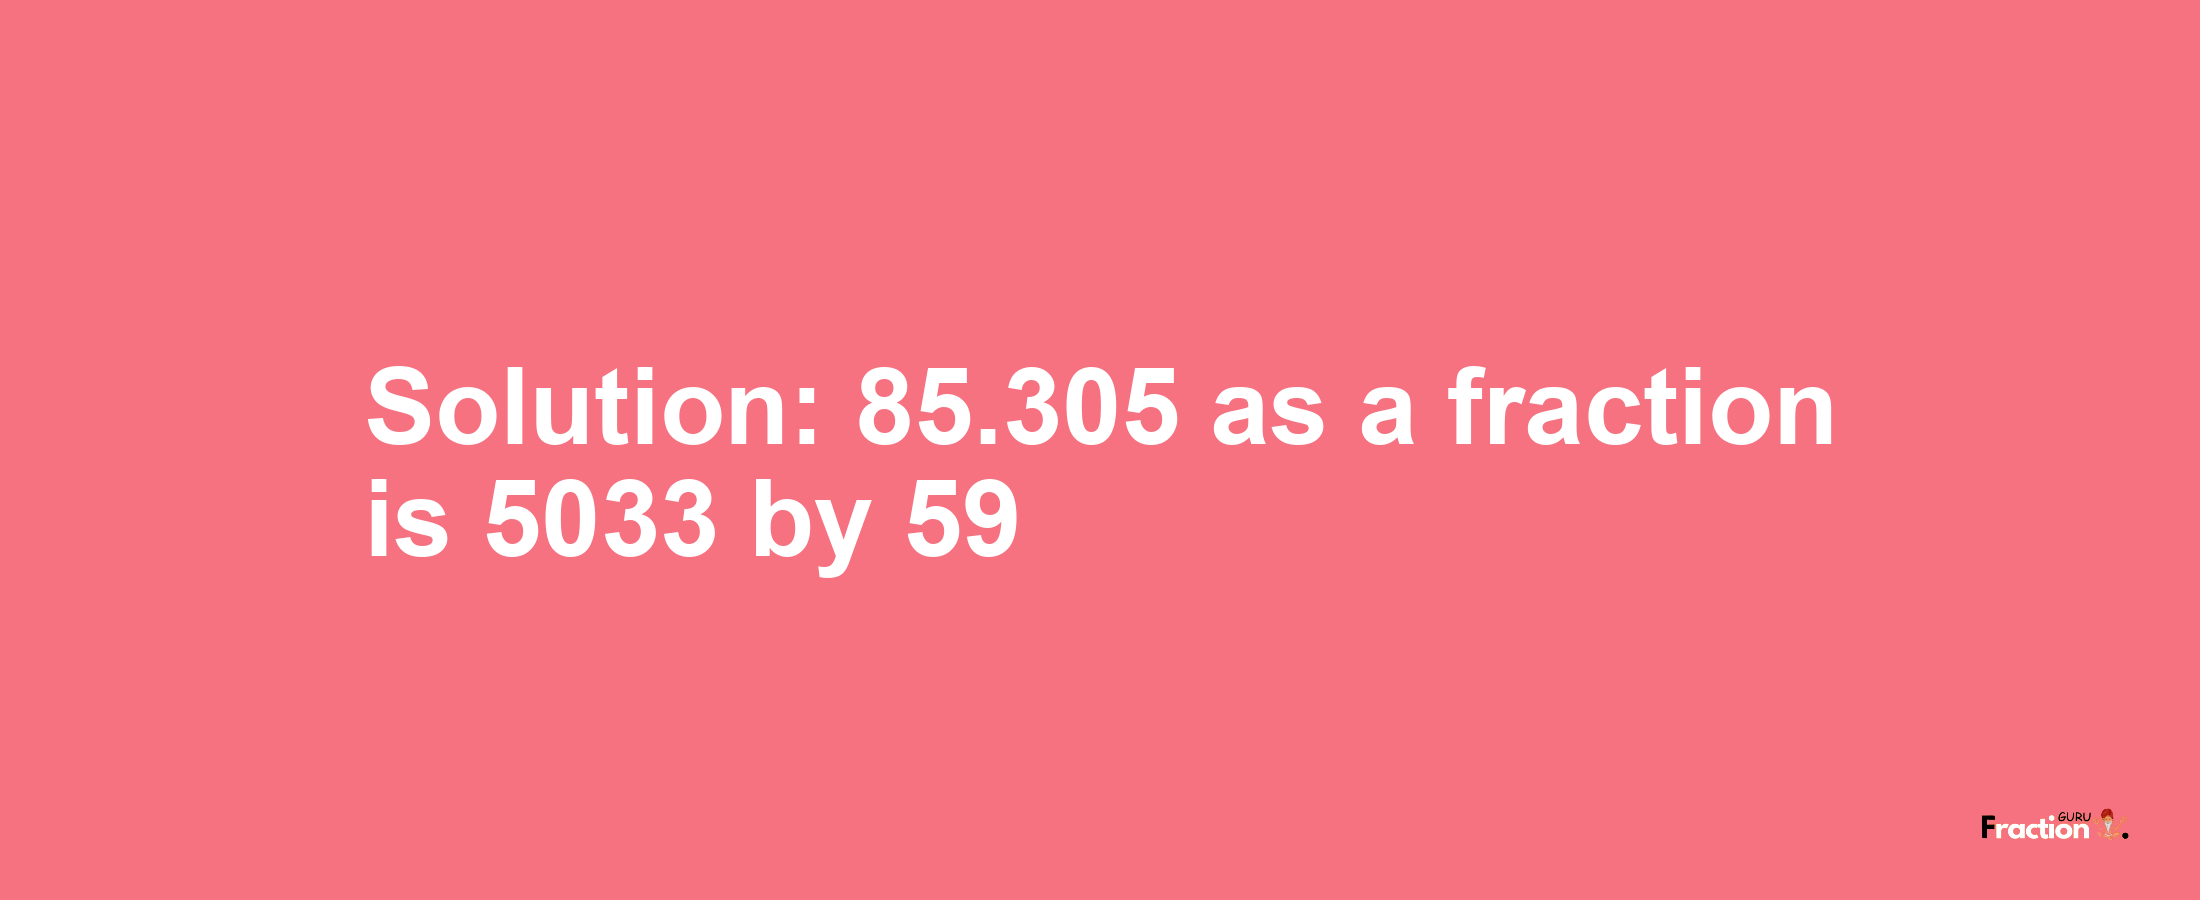 Solution:85.305 as a fraction is 5033/59